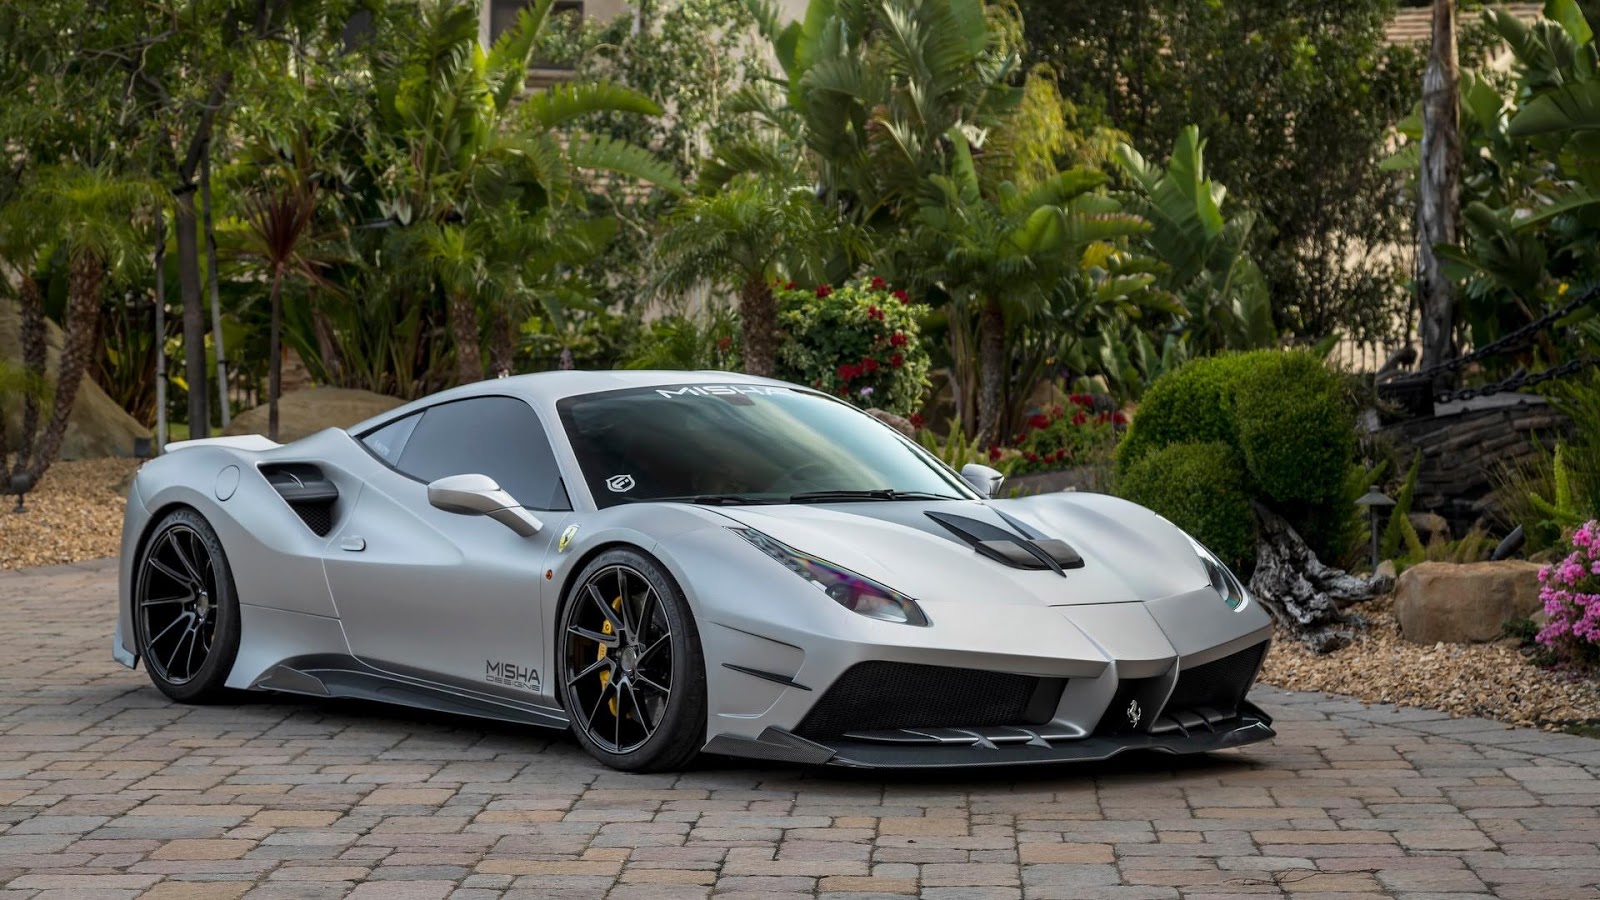 Ferraris 488 Speciale Will Have Nothing On Misha Designs